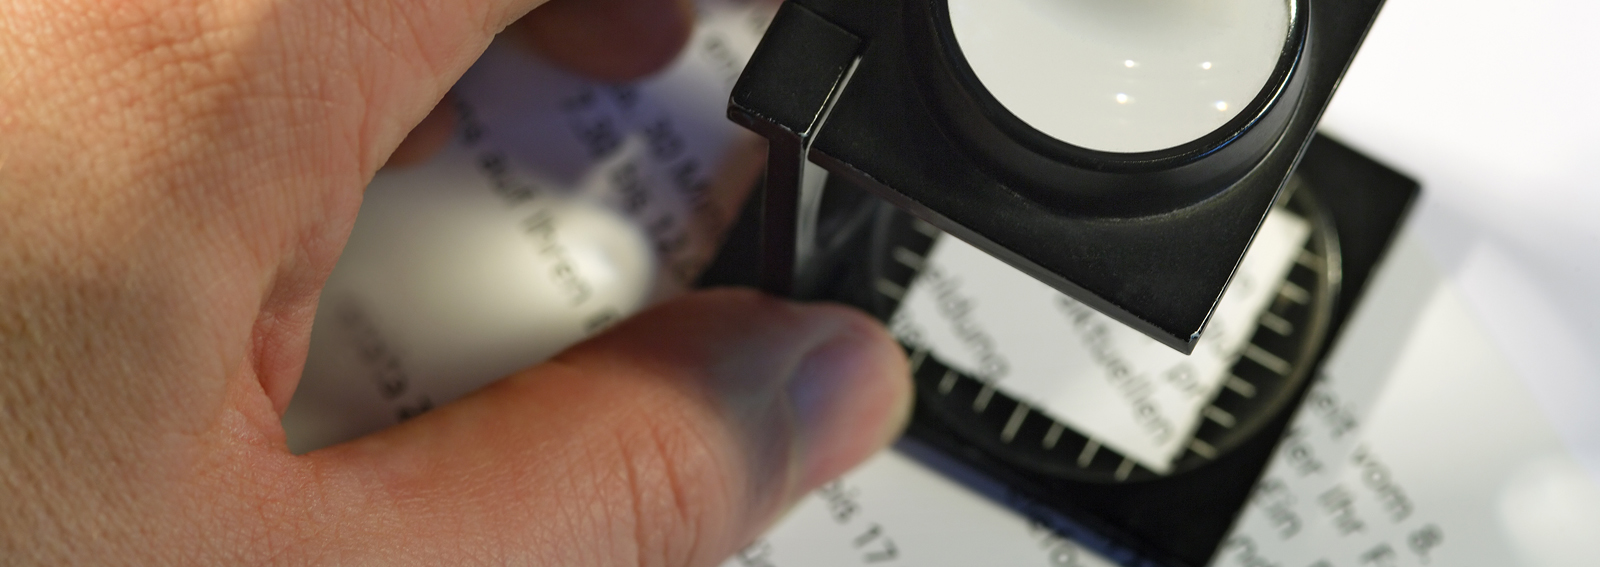 Shallow depth of field image of a printer using a loupe to check text